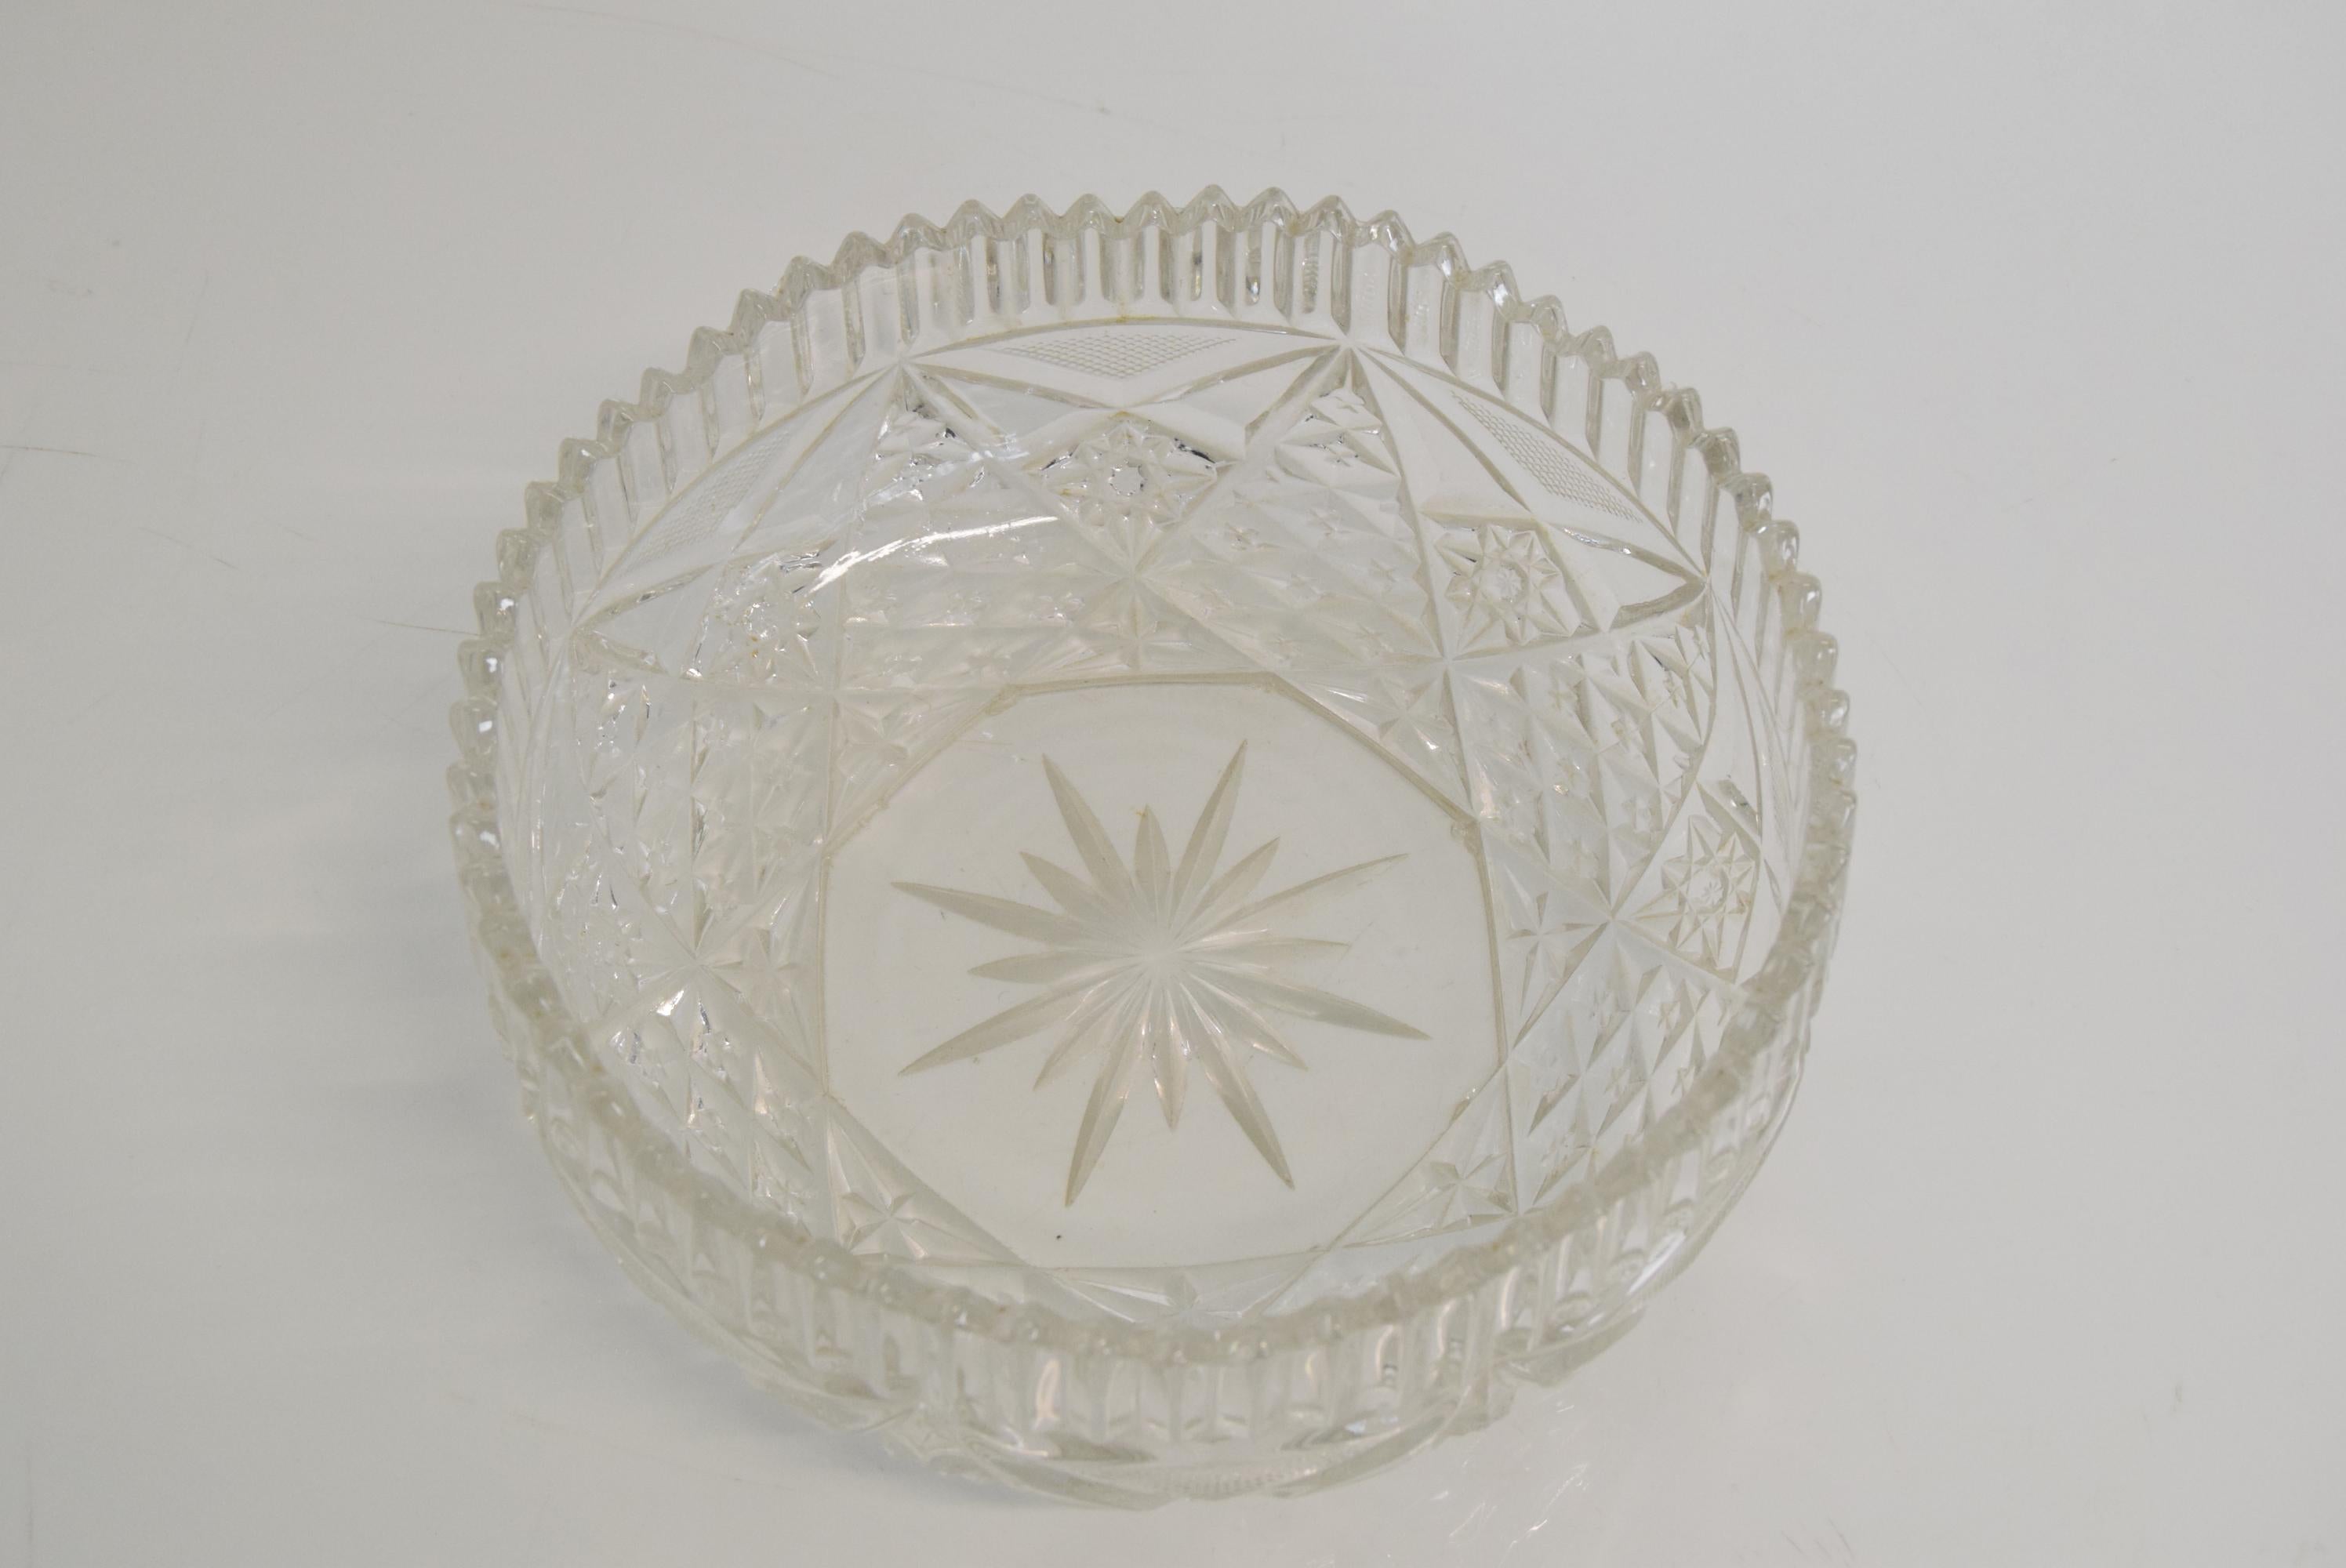 Made in Czechoslovakia
Made of cut glass
Original condition.




   